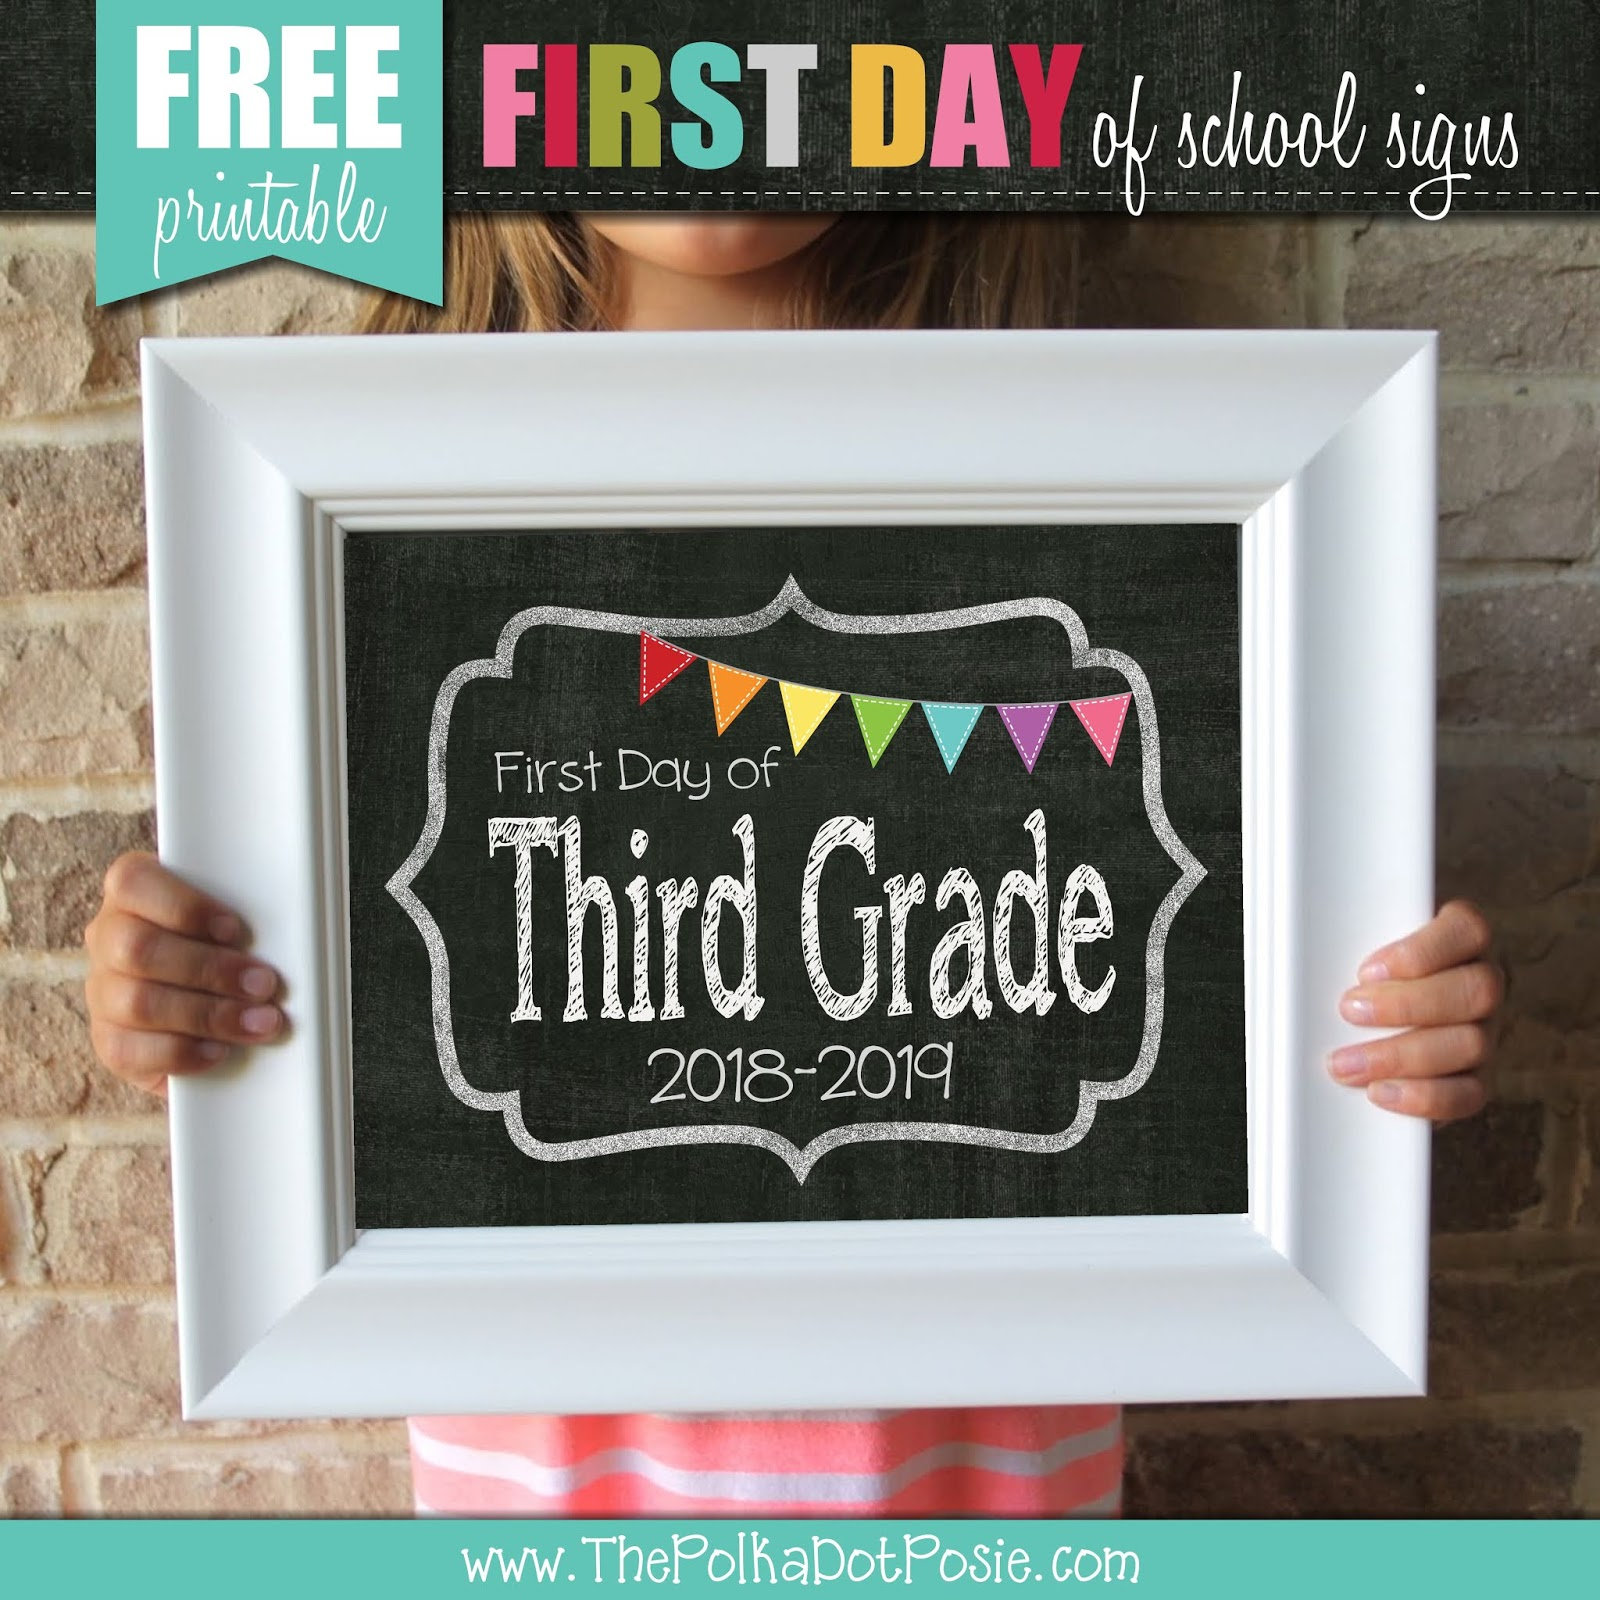 The Polka Dot Posie: Your Back-To-School Countdown Checklist! - Free Printable Fragrance Free Signs